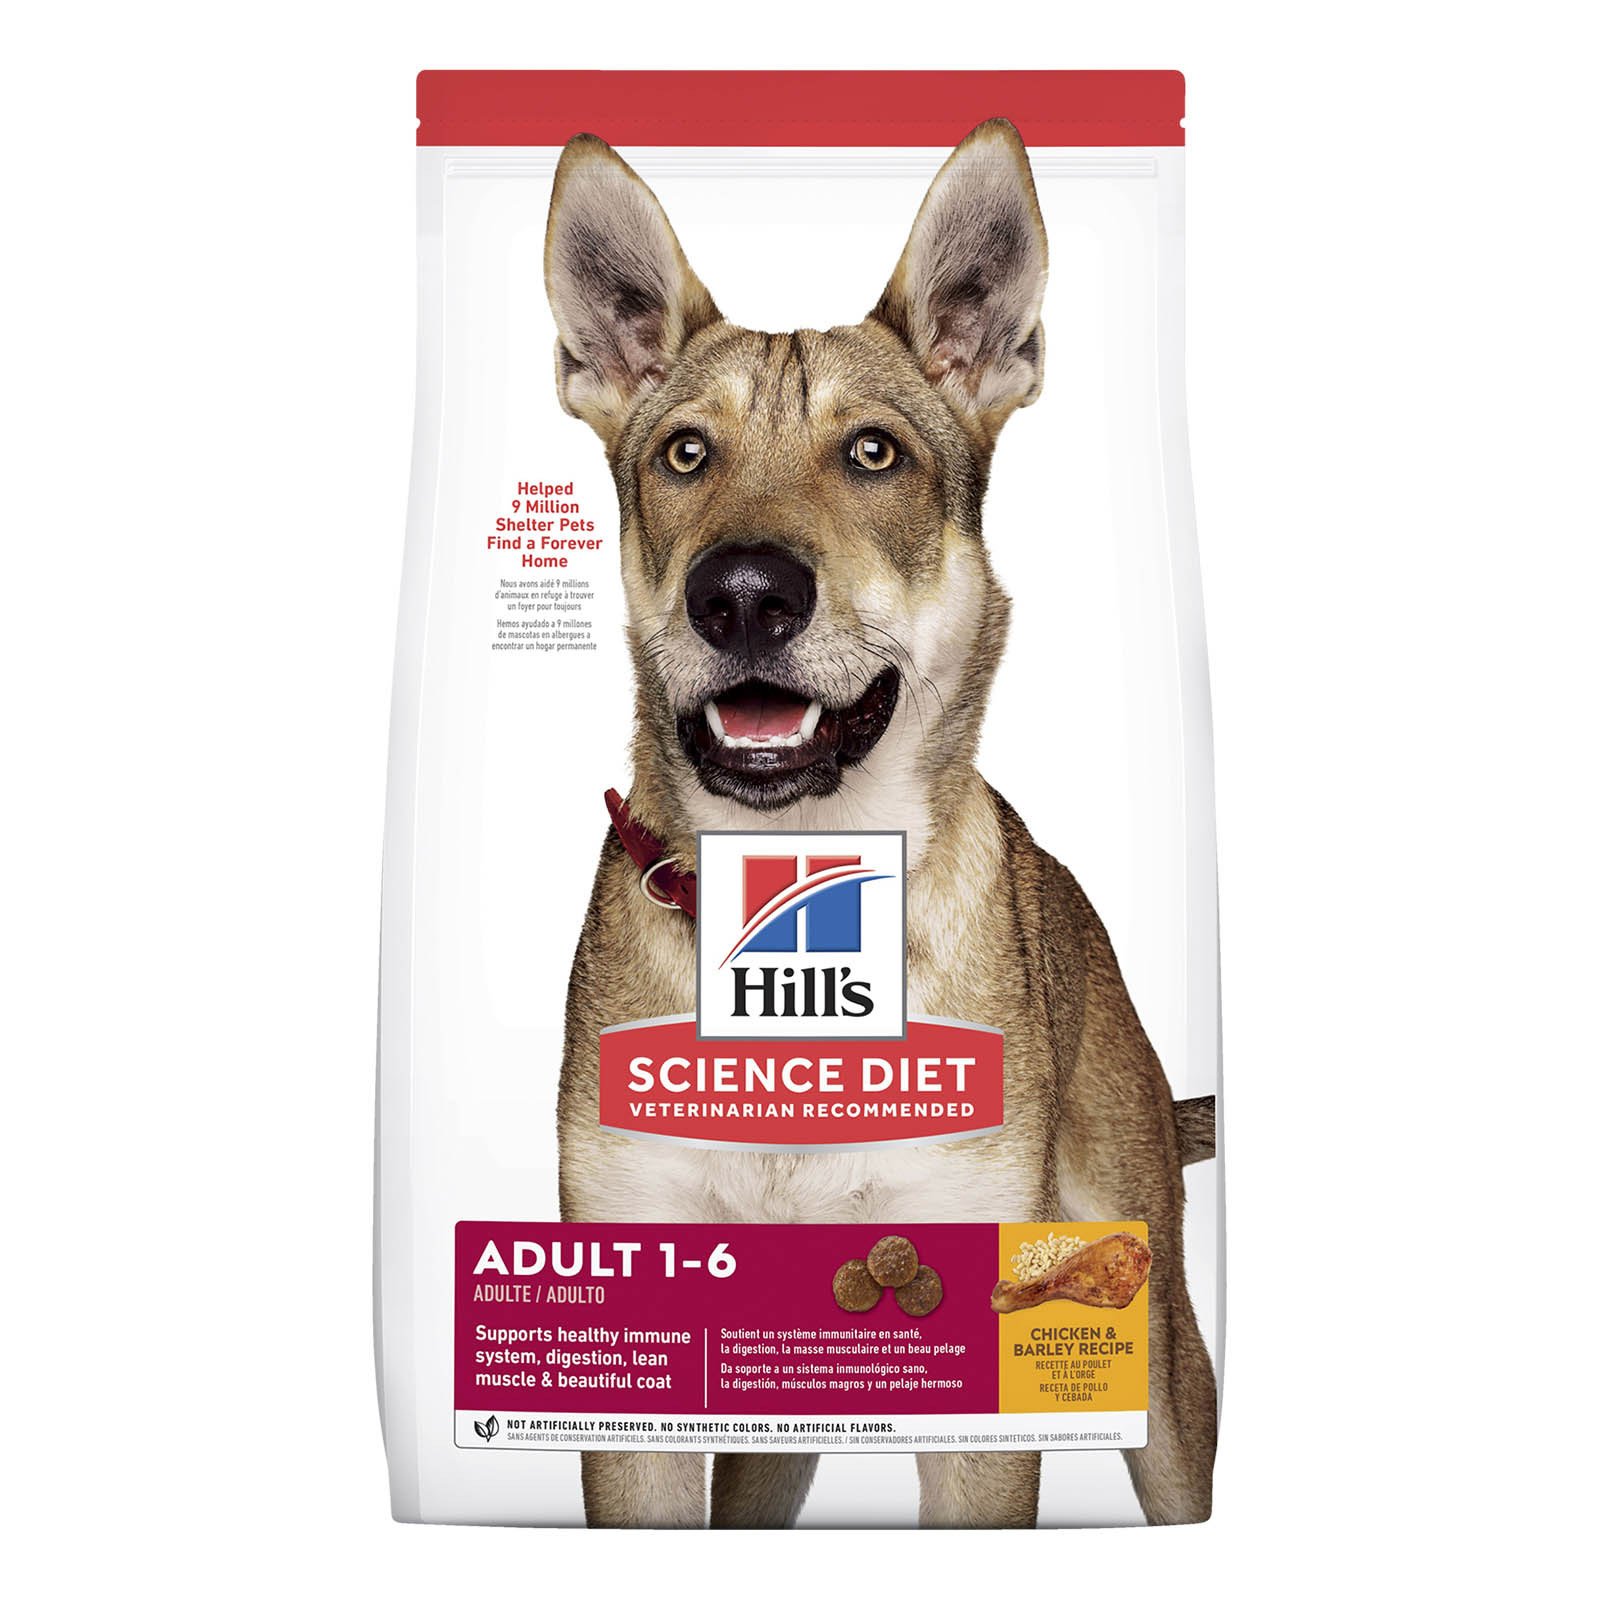 Hill's Science Diet Adult Chicken & Barley Dry Dog Food